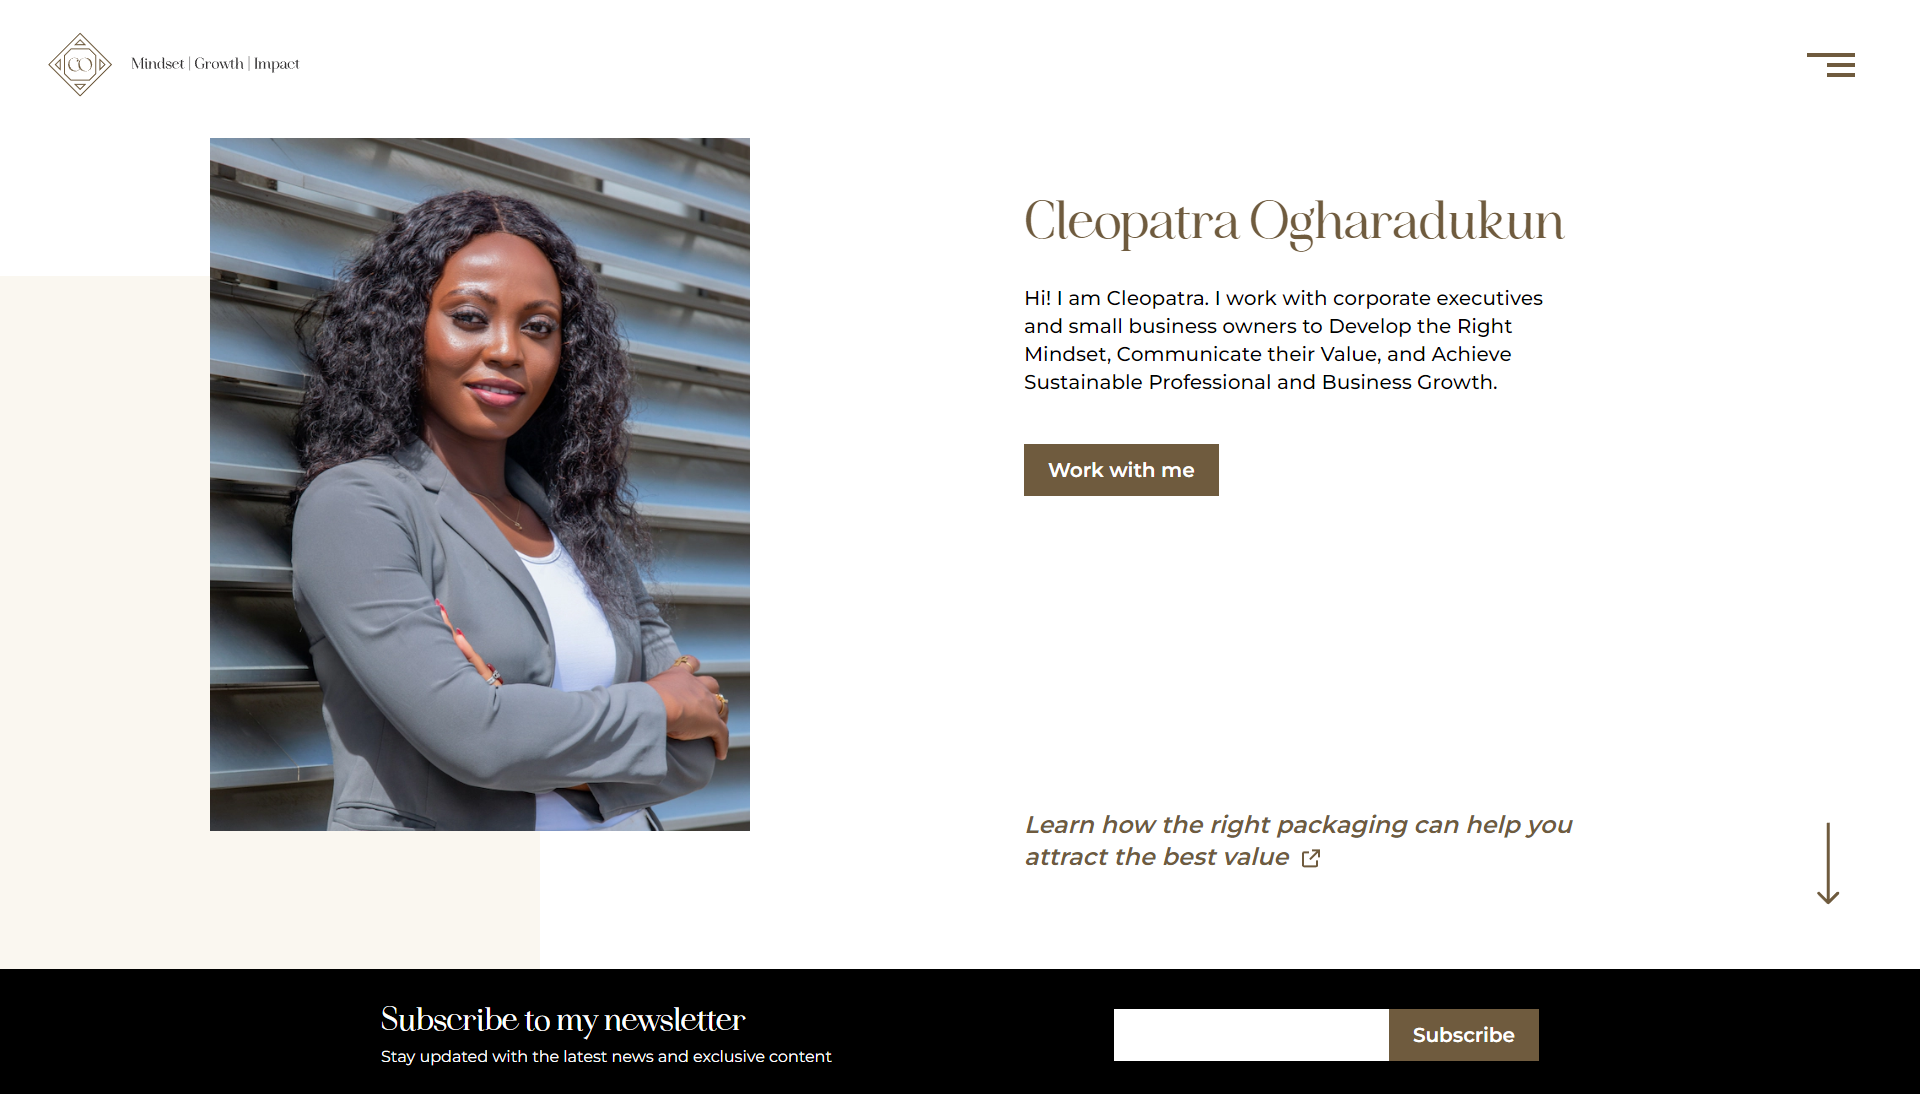 Cleopatra is a business development specialist and growth advisor with more than 10 years of experience